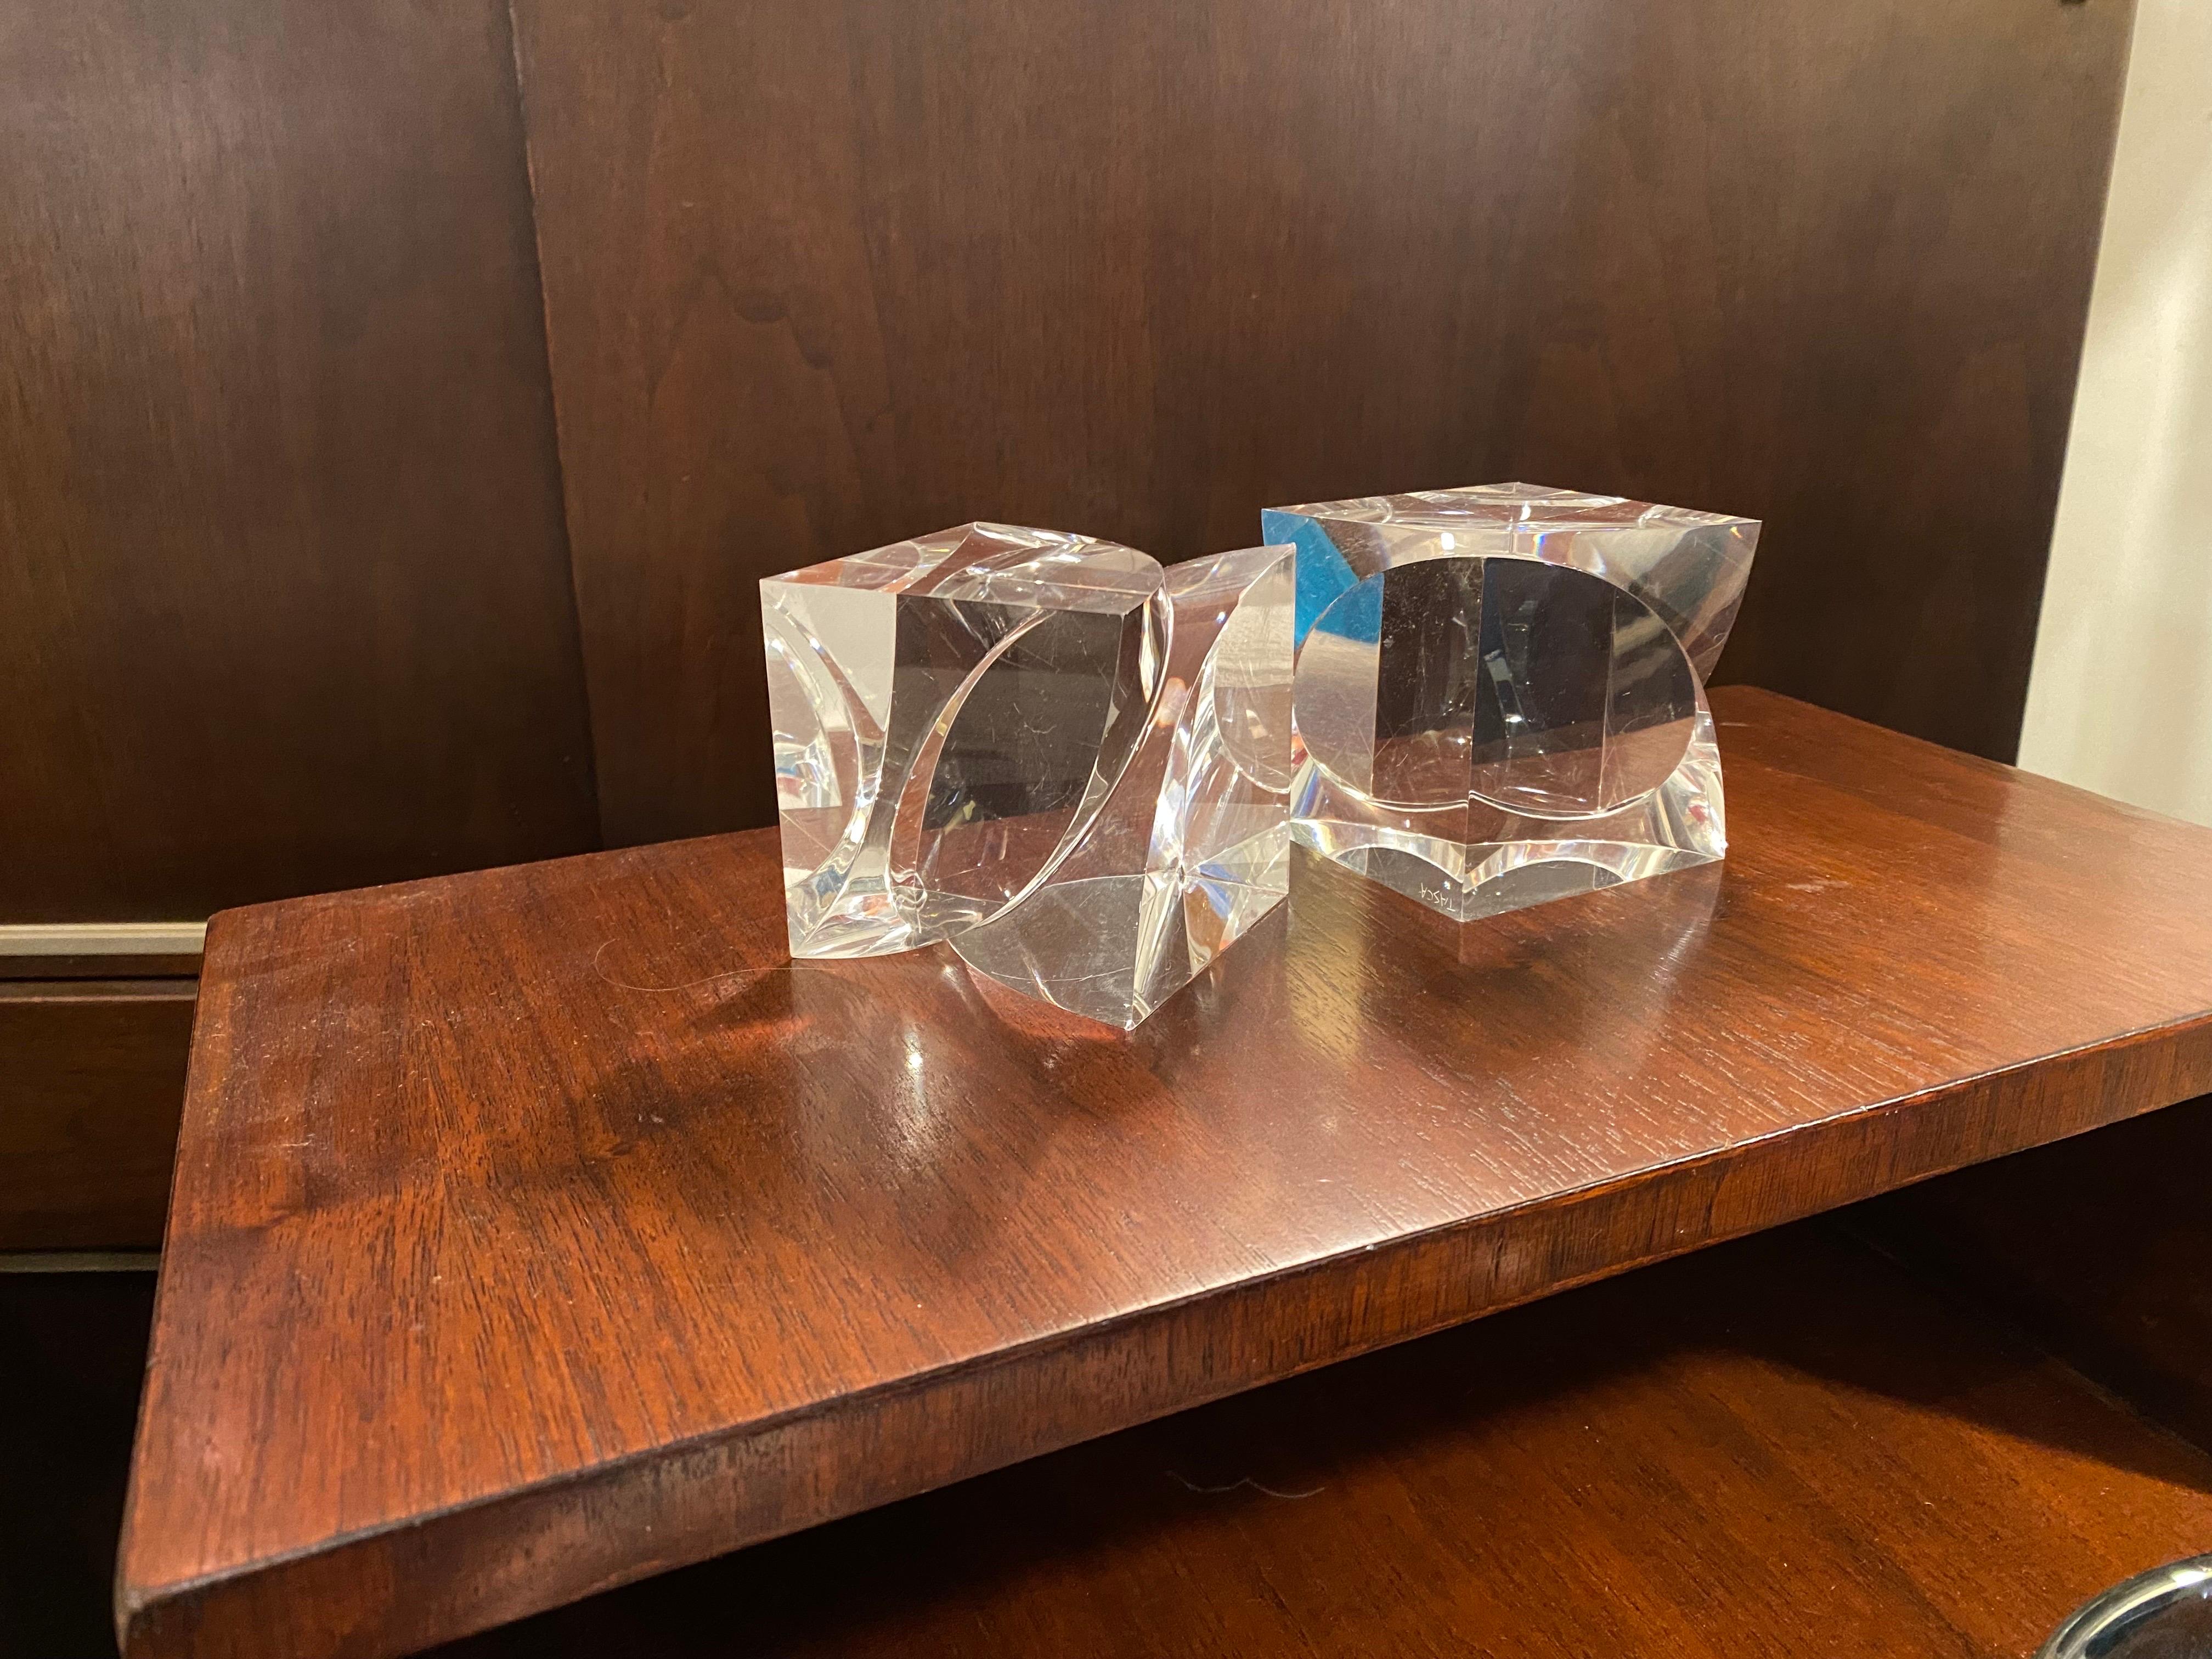 Alessio Tasca Fusina Polished Lucite Cubes with carved away design.  Signed bottom.  One has a slight flaw in the corner as seen in photo.  Lucite is very clear and overall good shape.